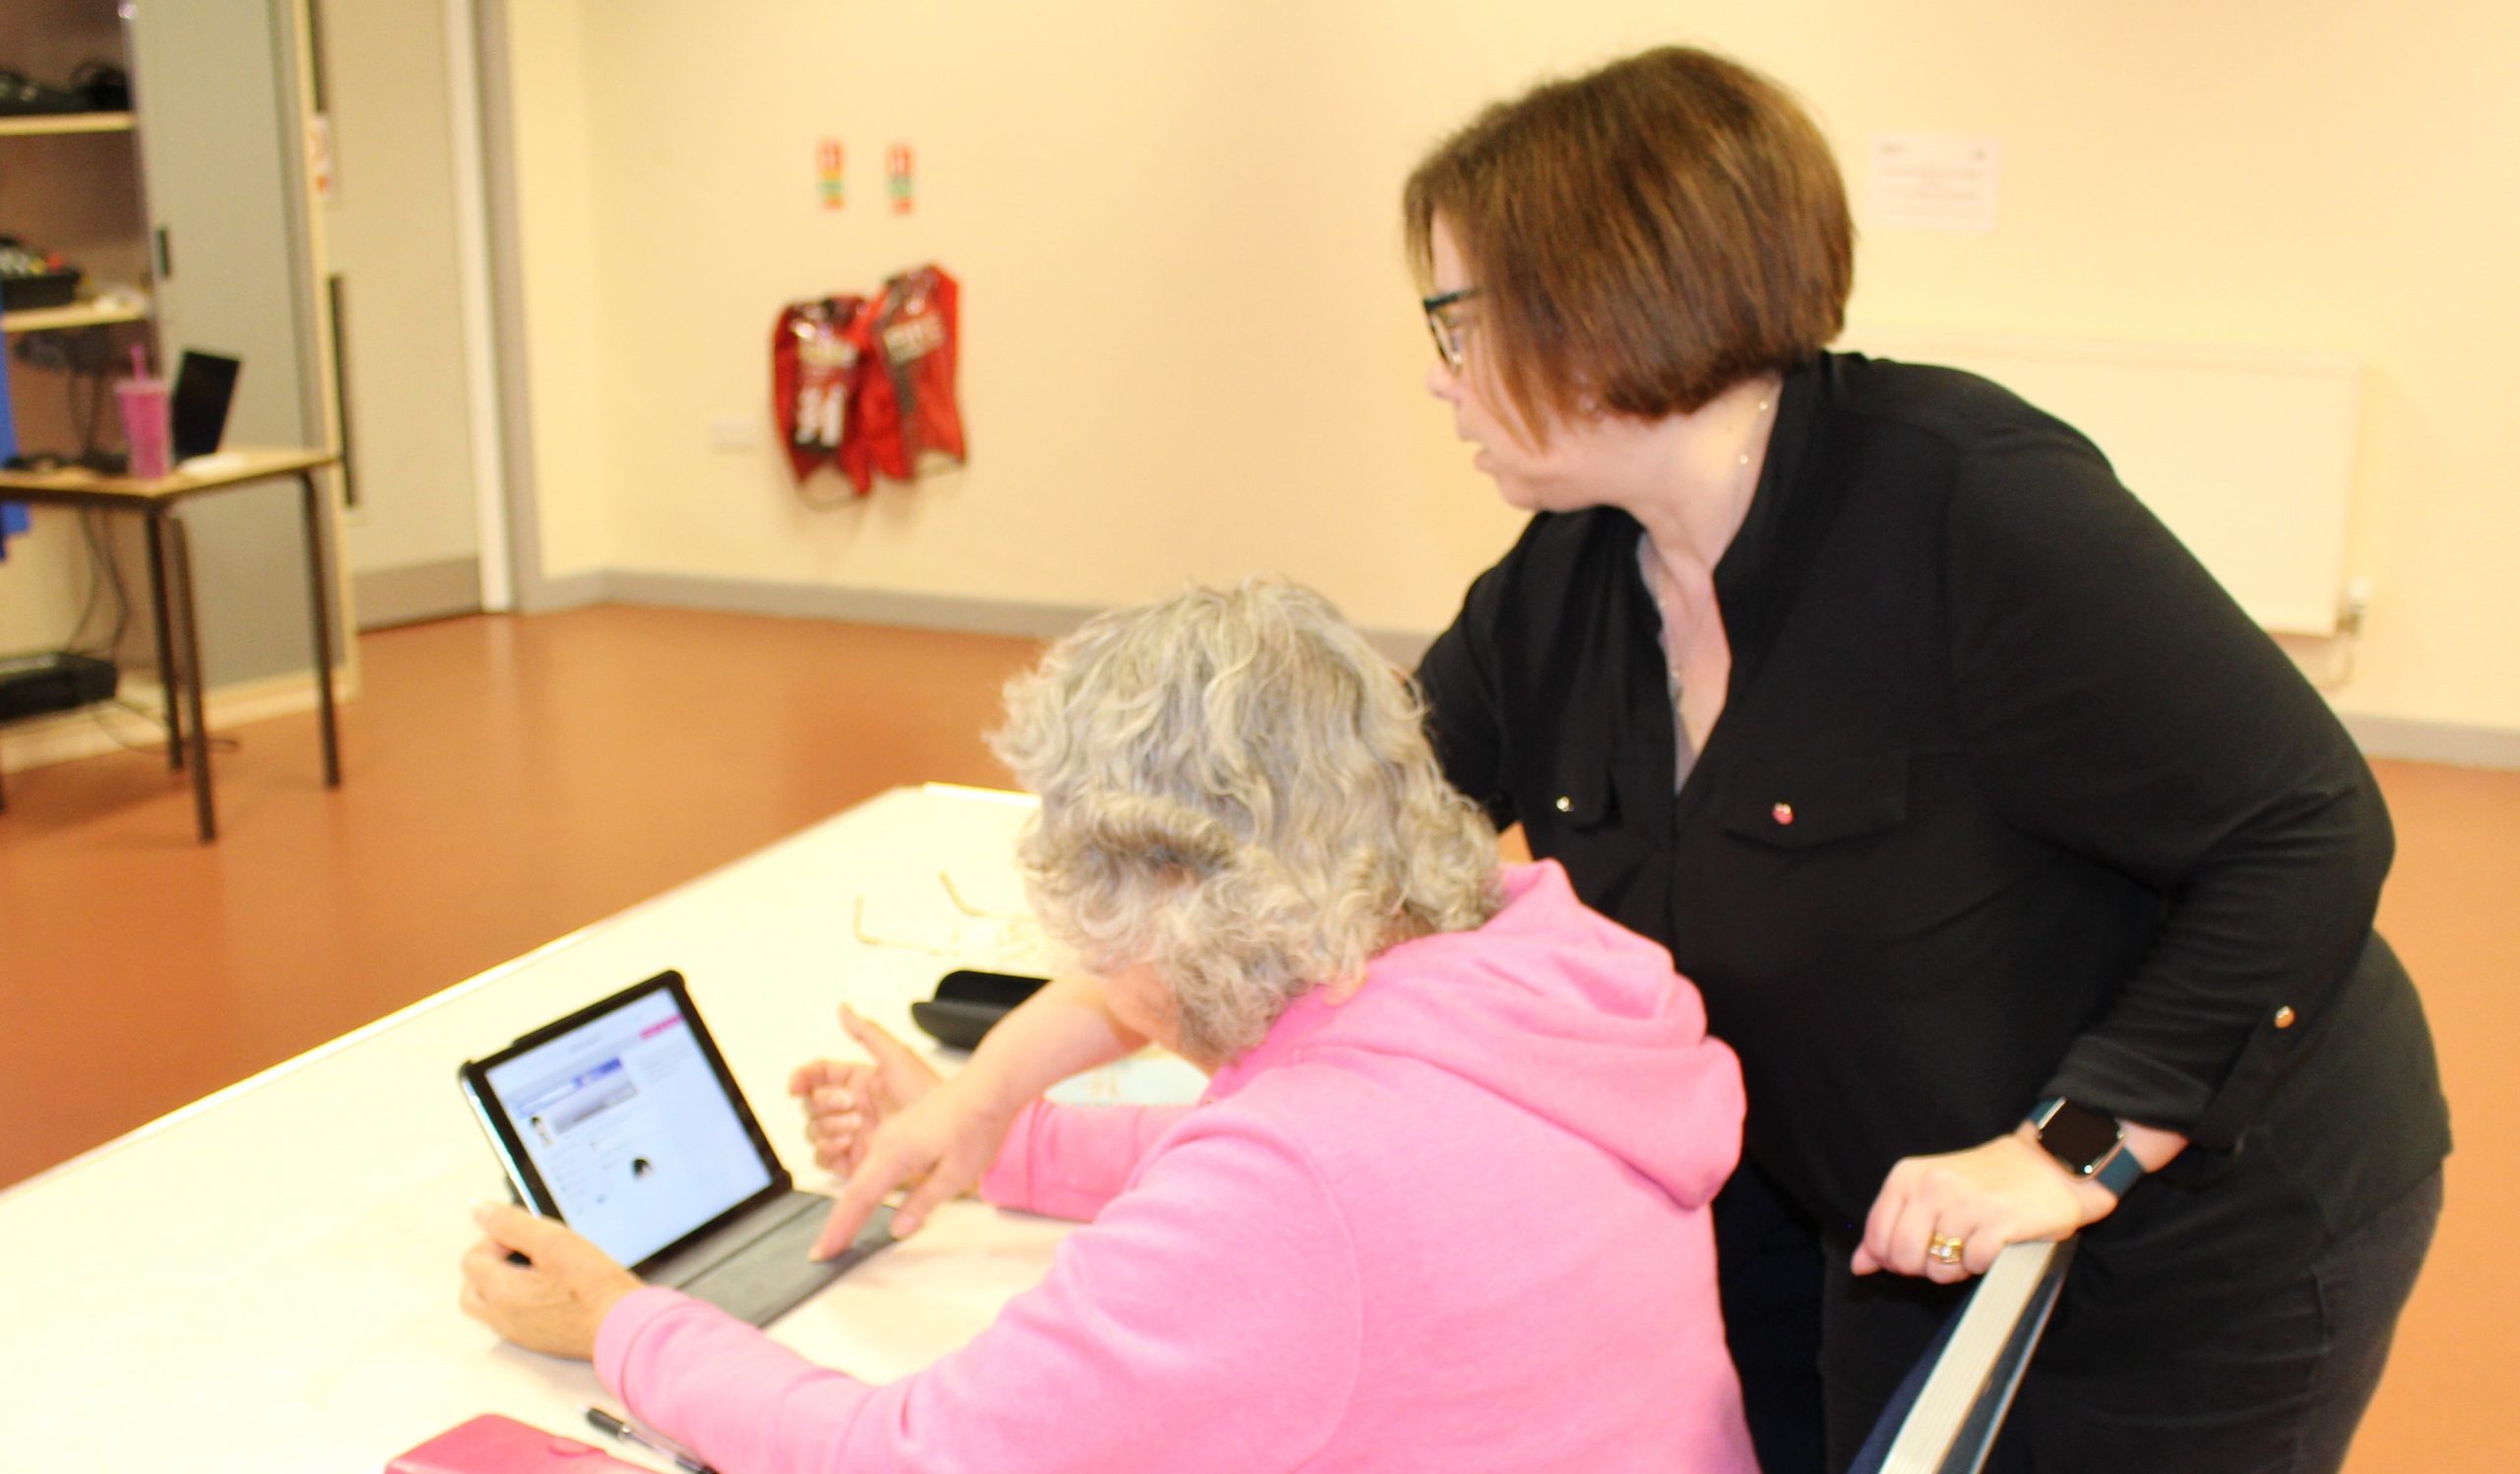 Younger woman helping older woman with ipad